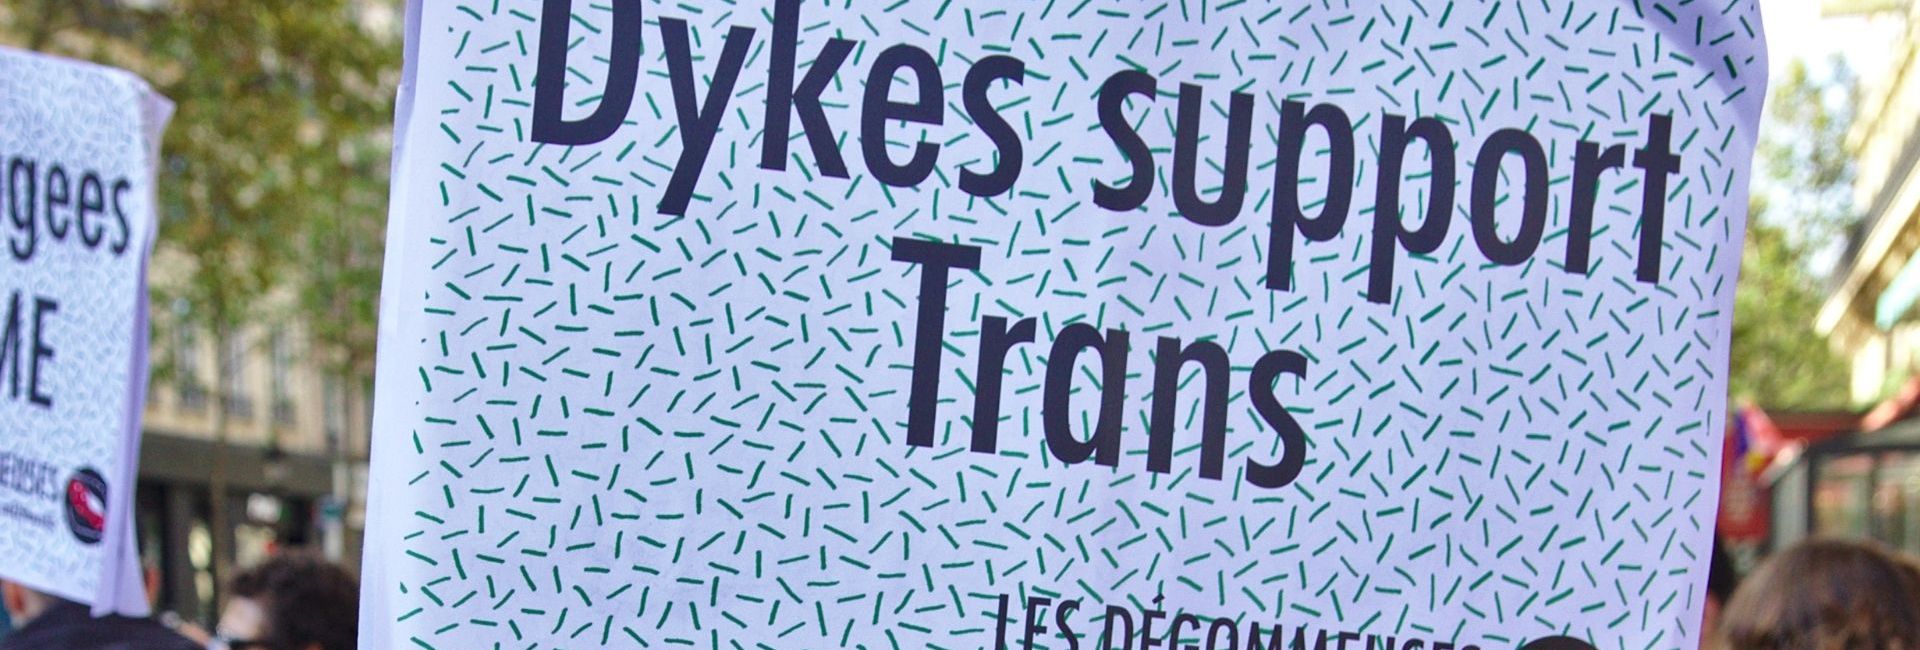 dykes support trans – les degommeuses – CC-BY Missbutterfly